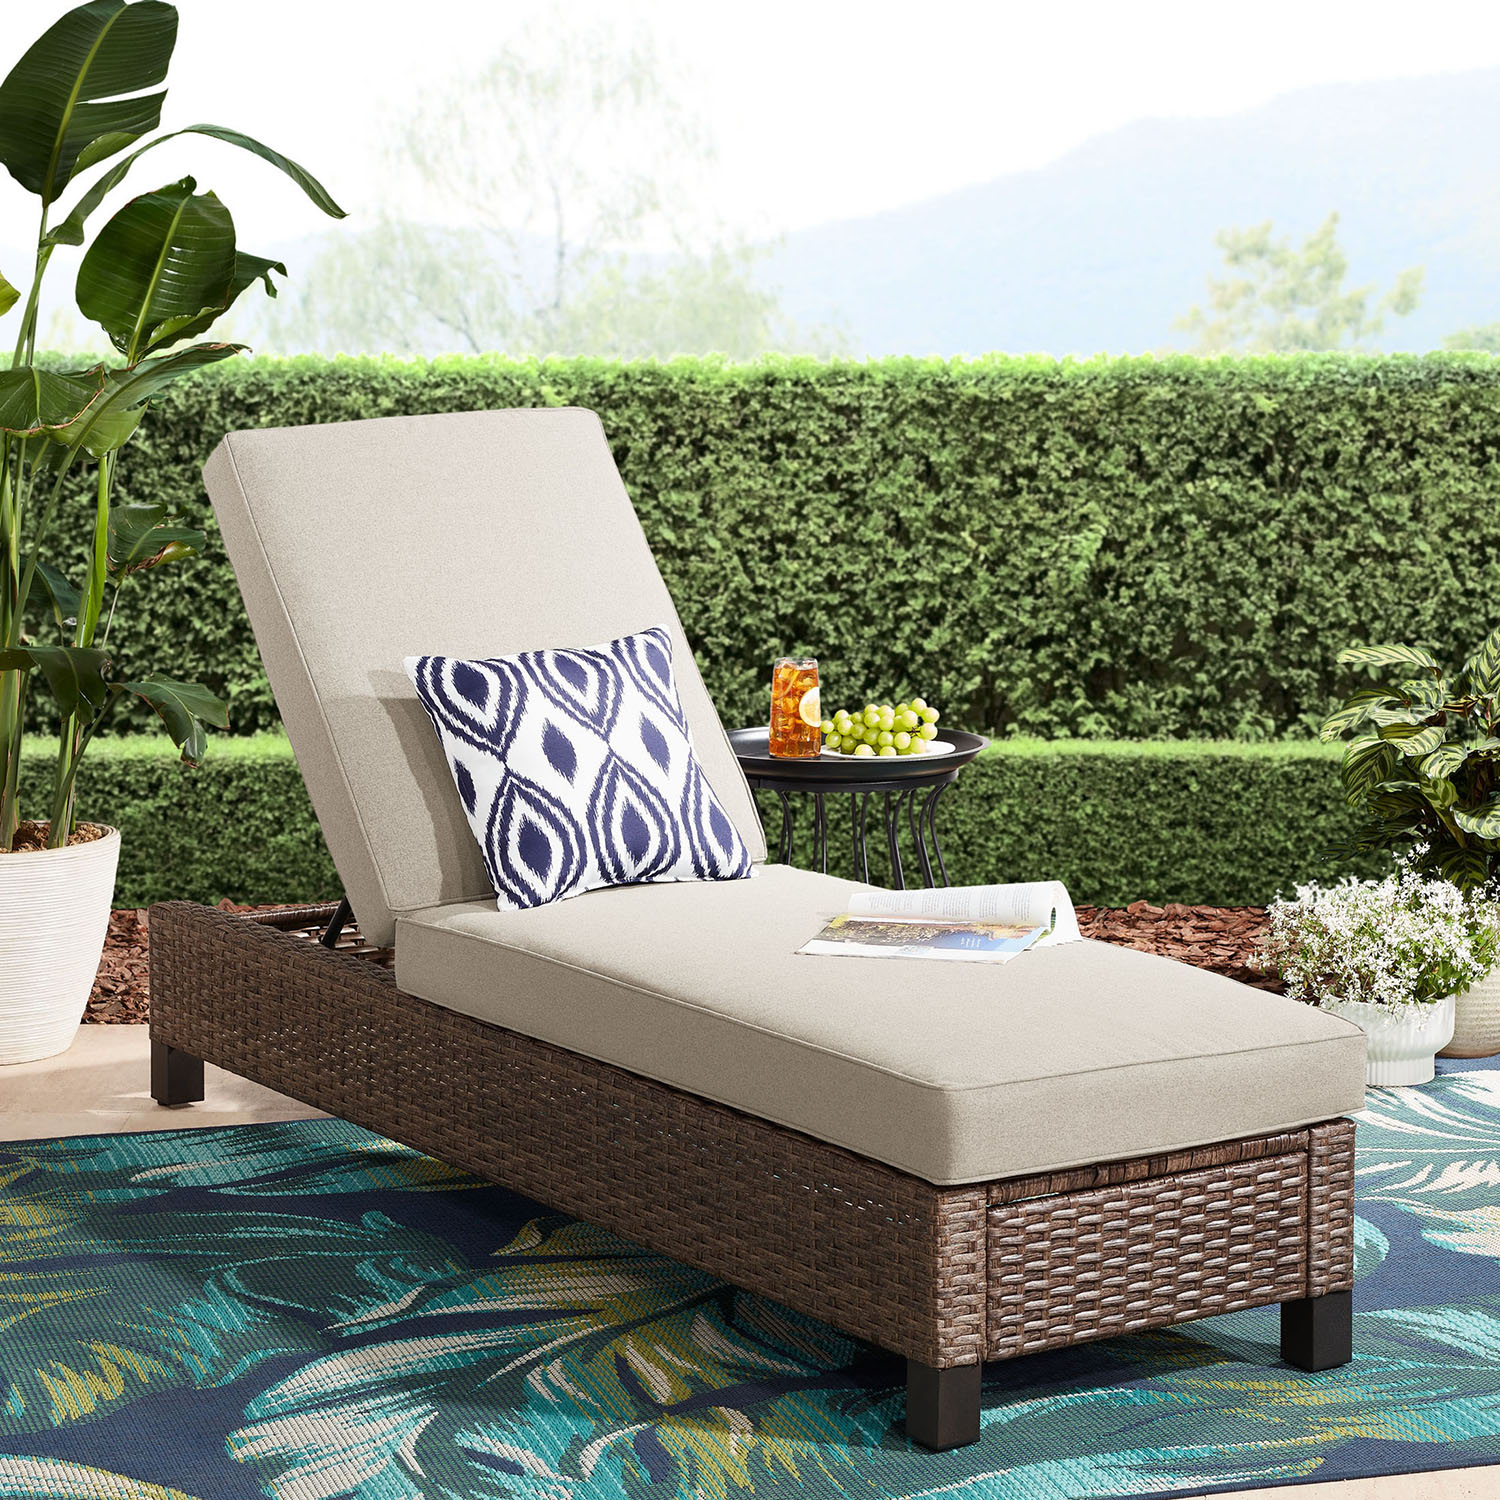 Better Homes & Gardens Brookbury Single Outdoor Chaise Lounge Chair- Beige - image 1 of 5